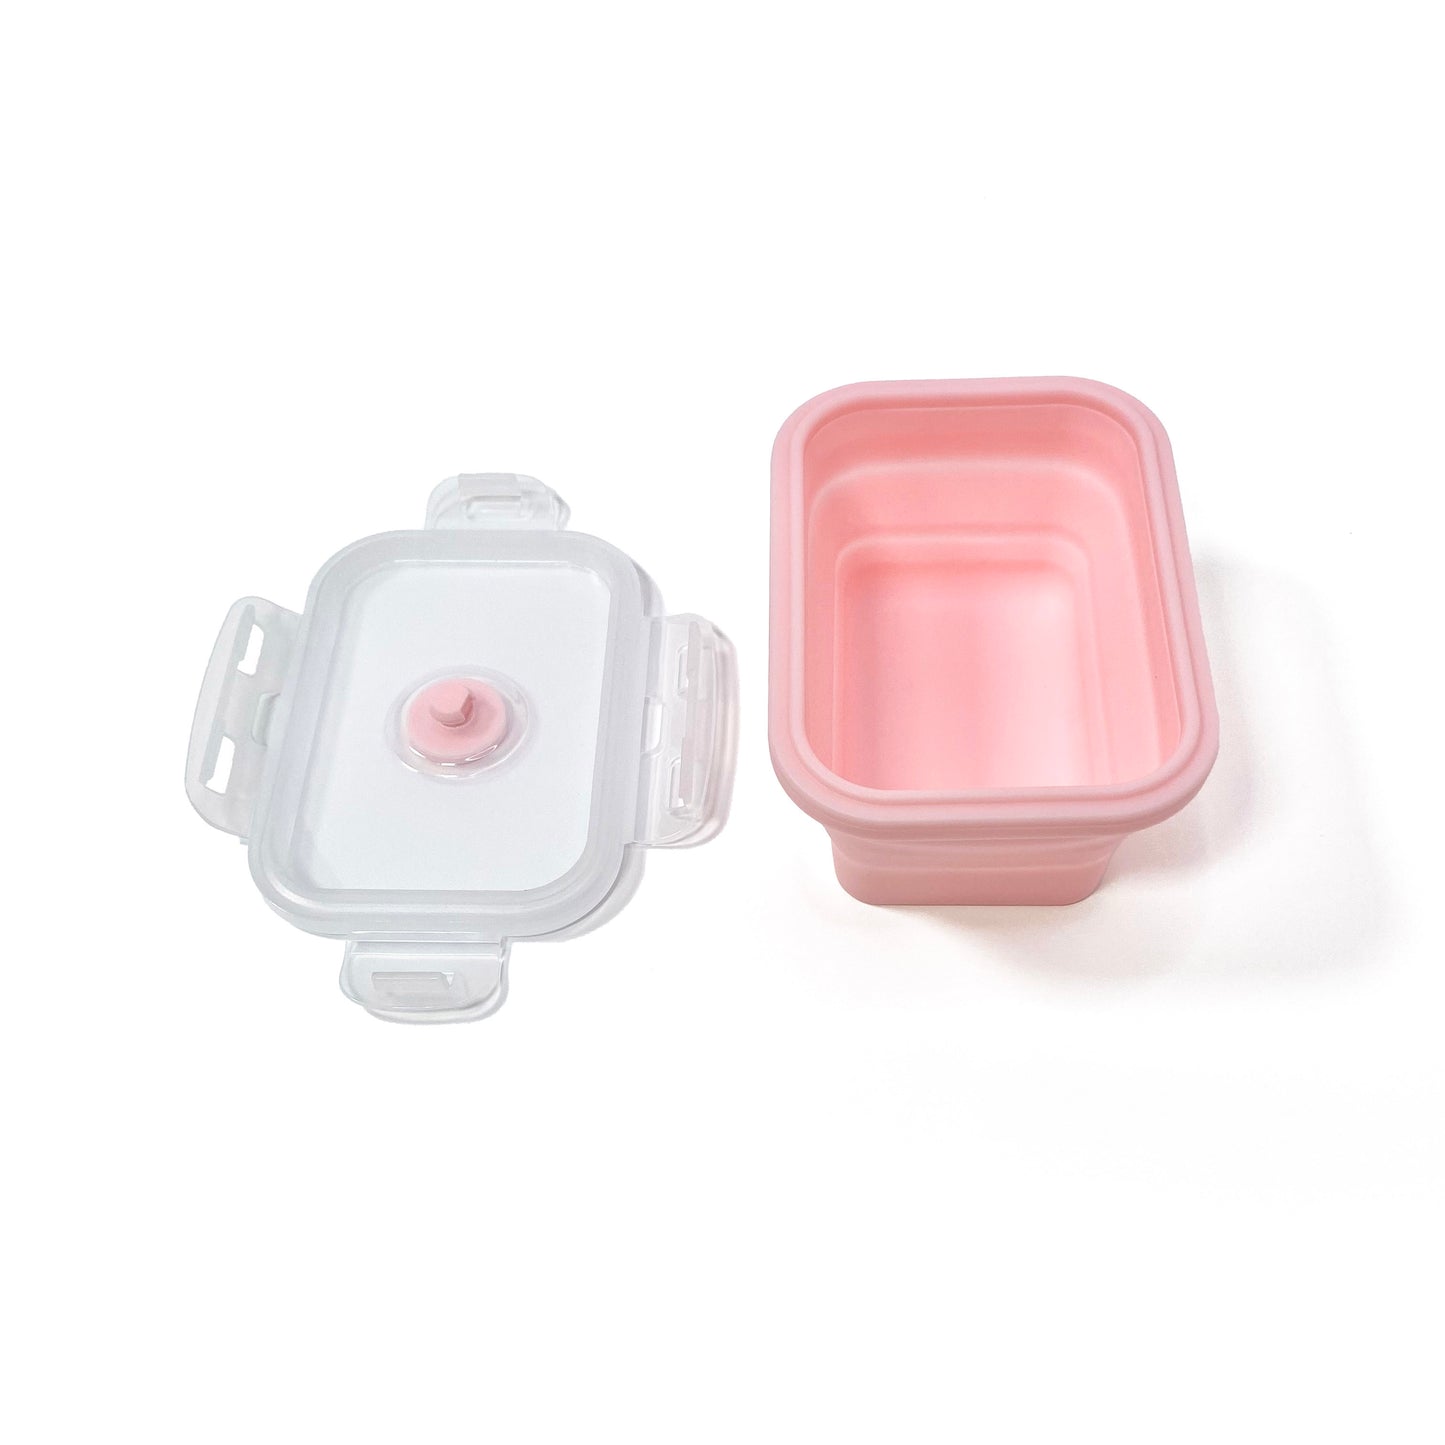 A collapsible pink rectangular silicone food storage tub with lid. Side view with the tub fully expanded and the lid removed.